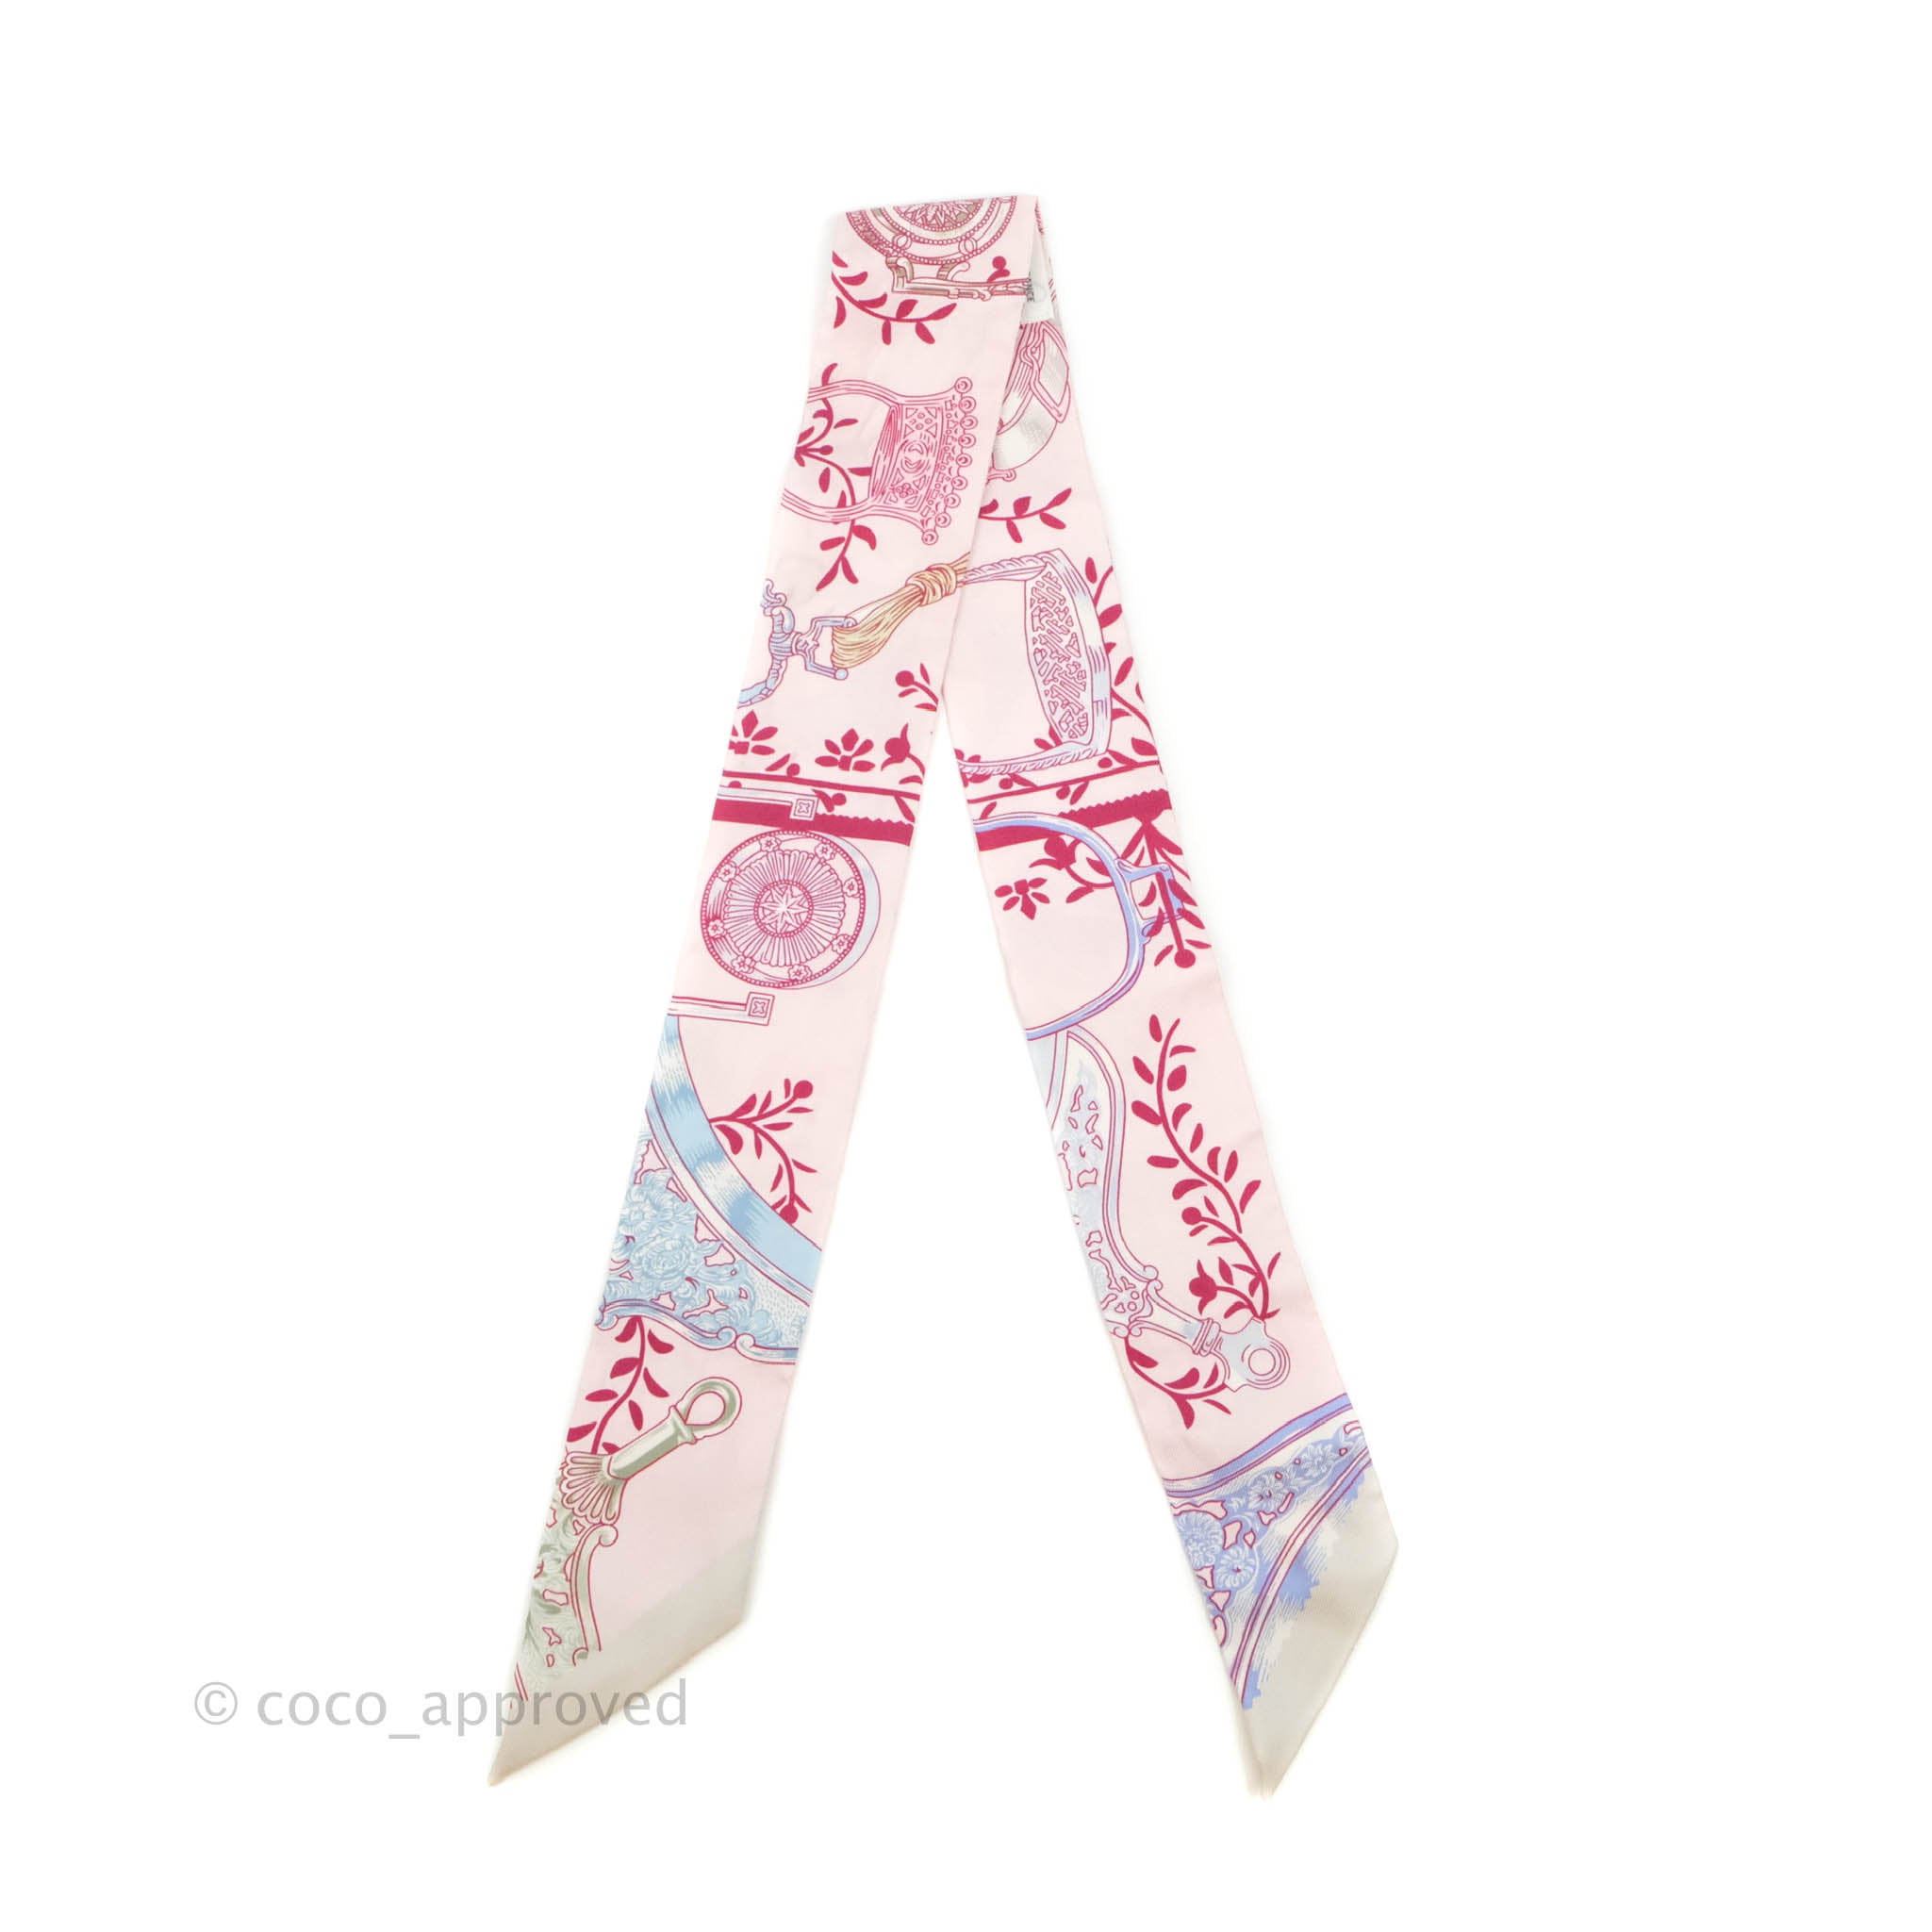 HERMES fringe Twilly Scarf silk pink BRAND NEW, Limited Edition